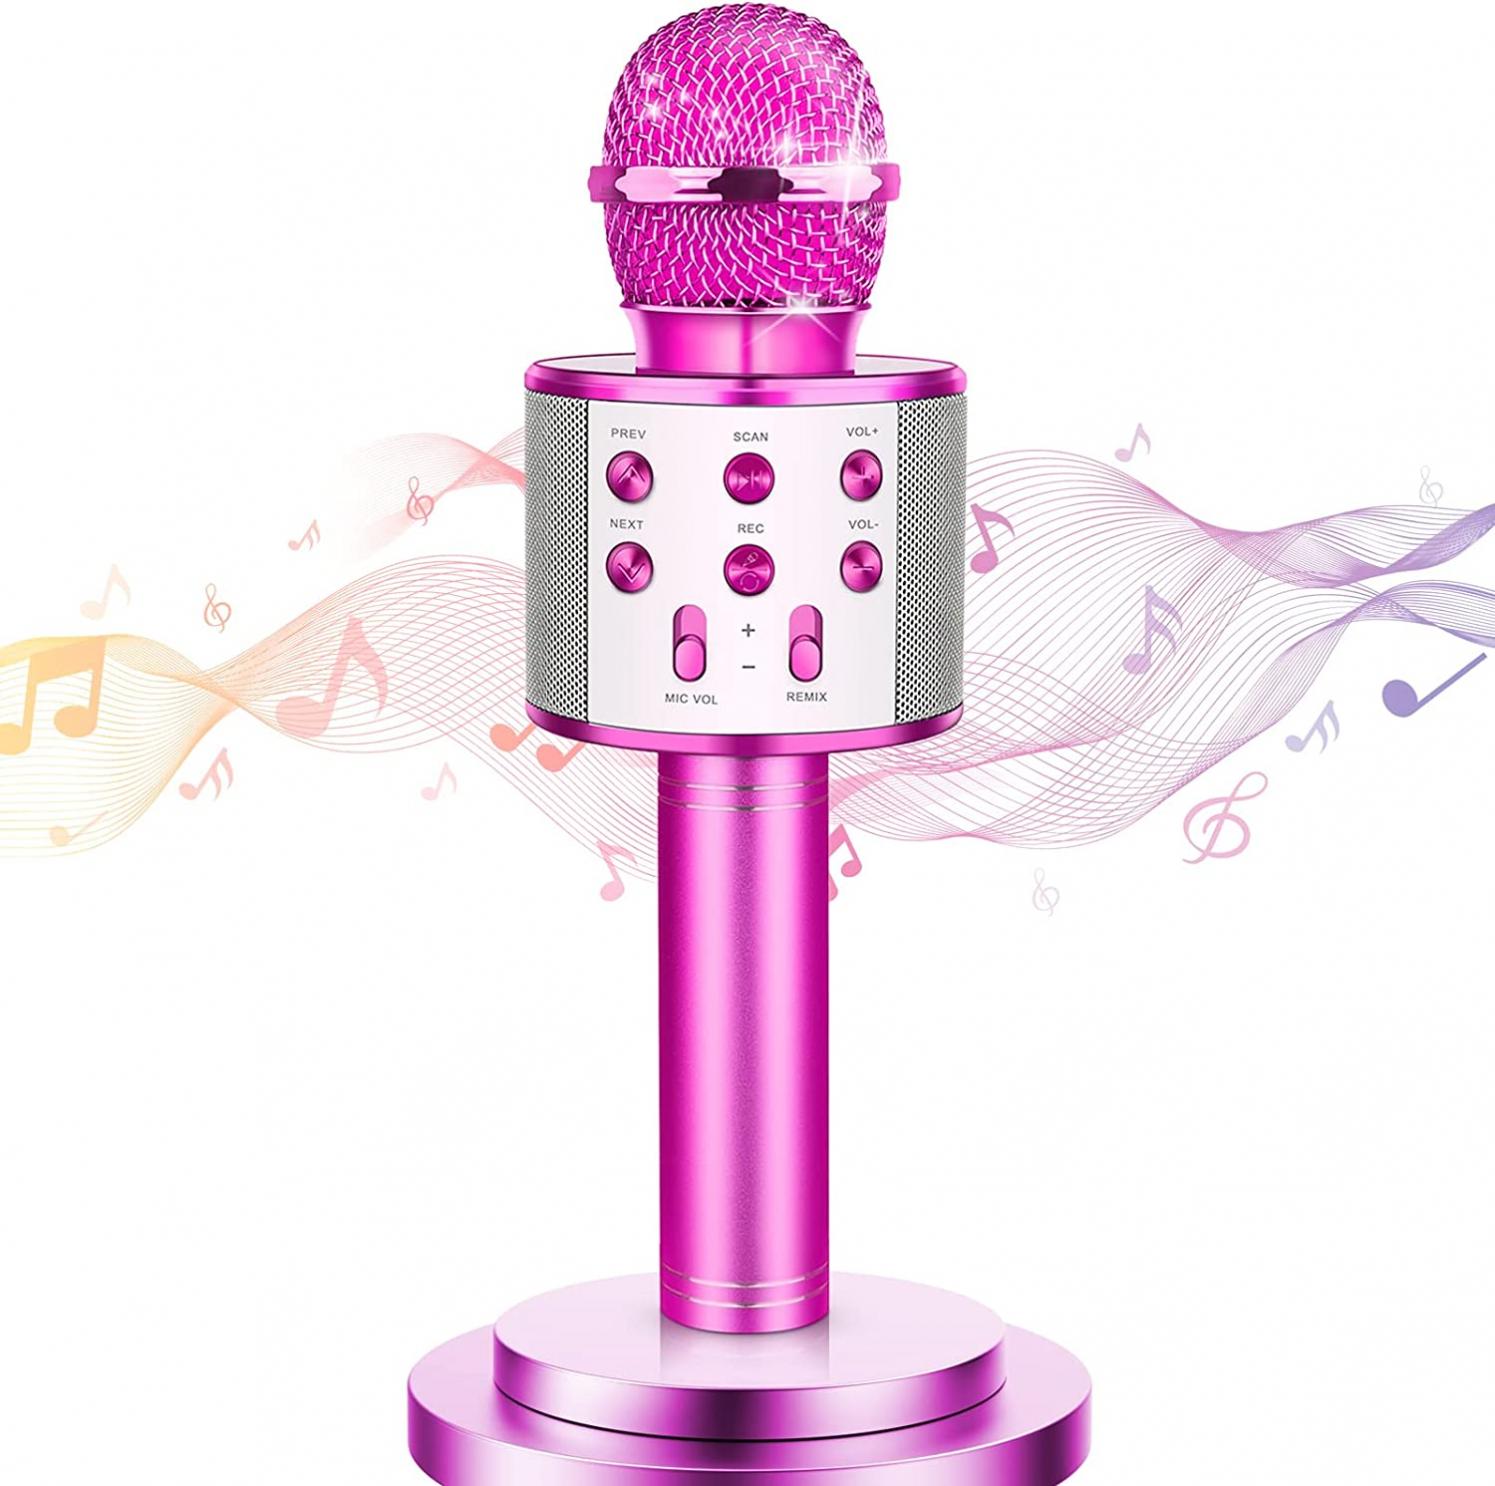 4-6 Year Old Girl Birthday Gifts: wetepuxi Kids Bluetooth Wireless Toy Microphone for Kids 5-7 Toddler Christmas Toys for Girls Age 6-8 Gift for 3 4 5 7 8 9 10 11 Years Old Girl Boy Kid Purple